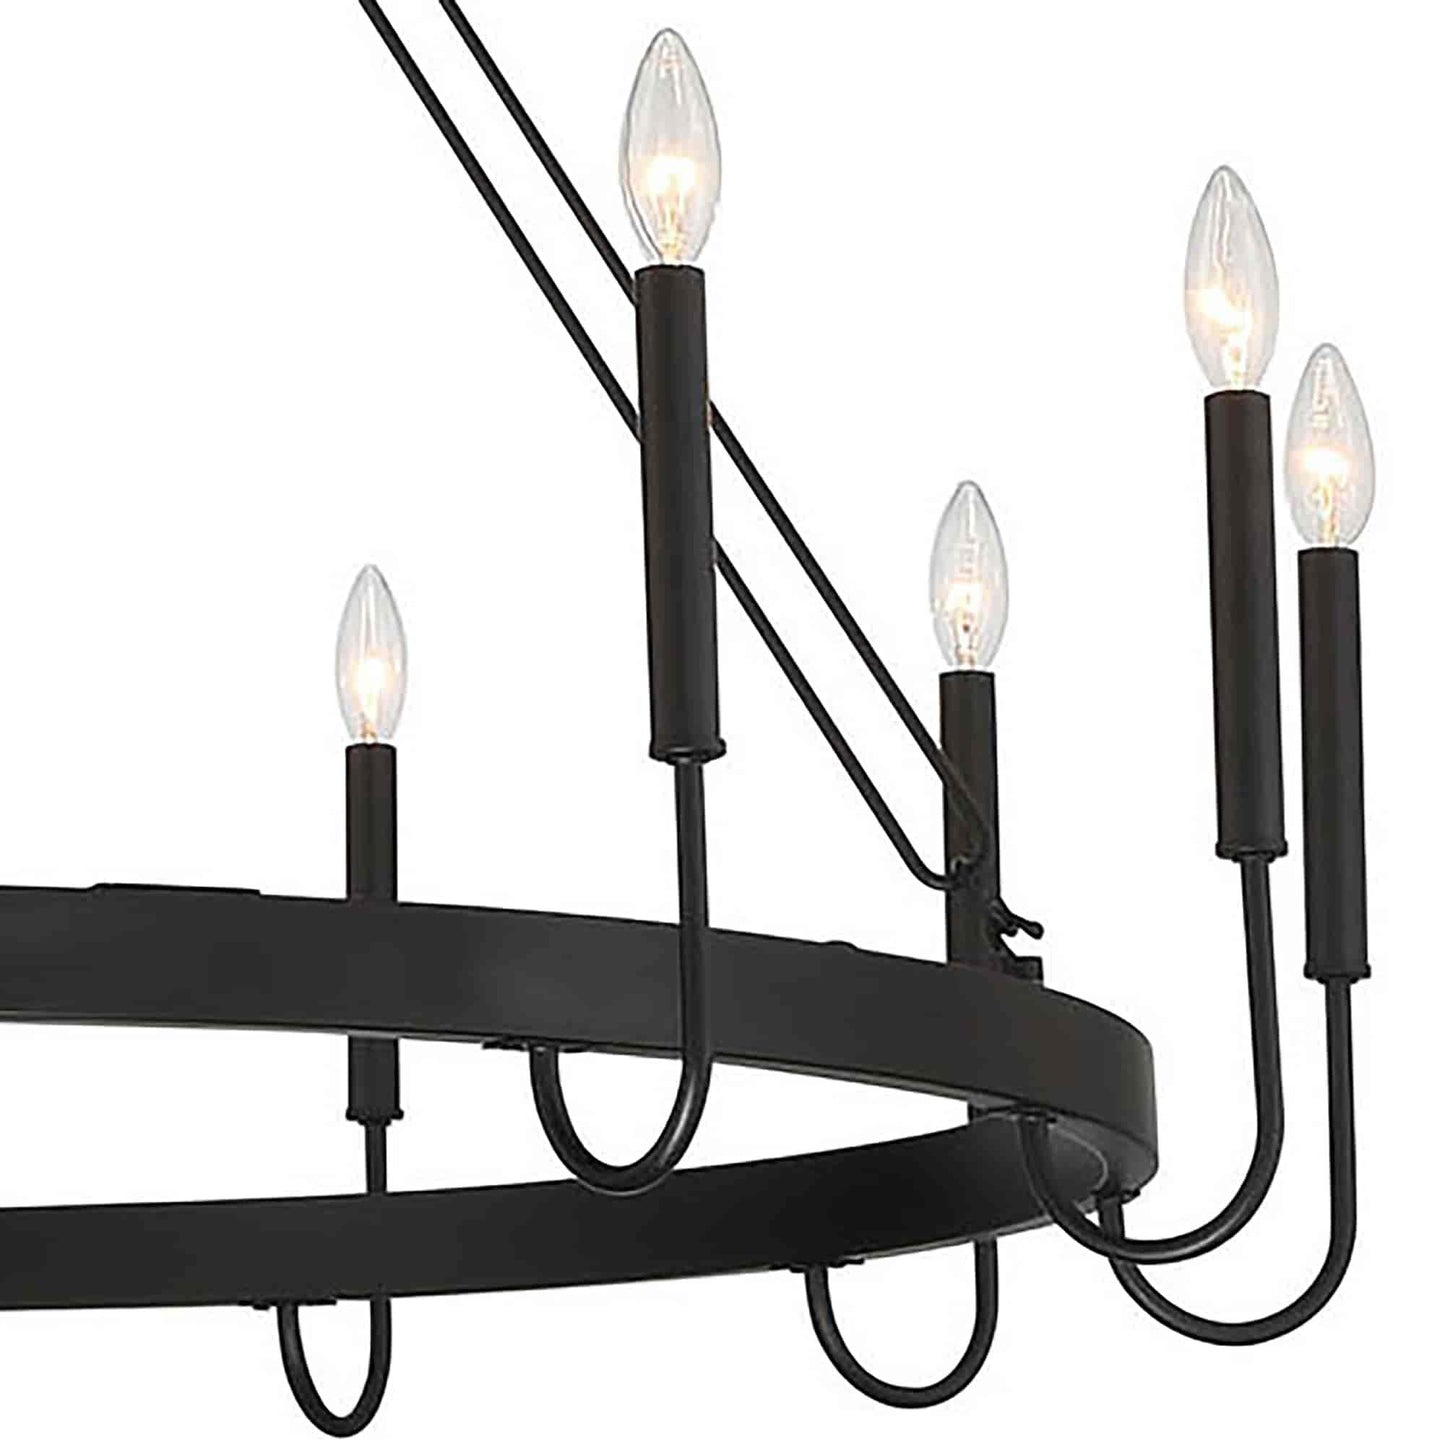 12 light candle style wagon wheel chain chandelier (3) by ACROMA